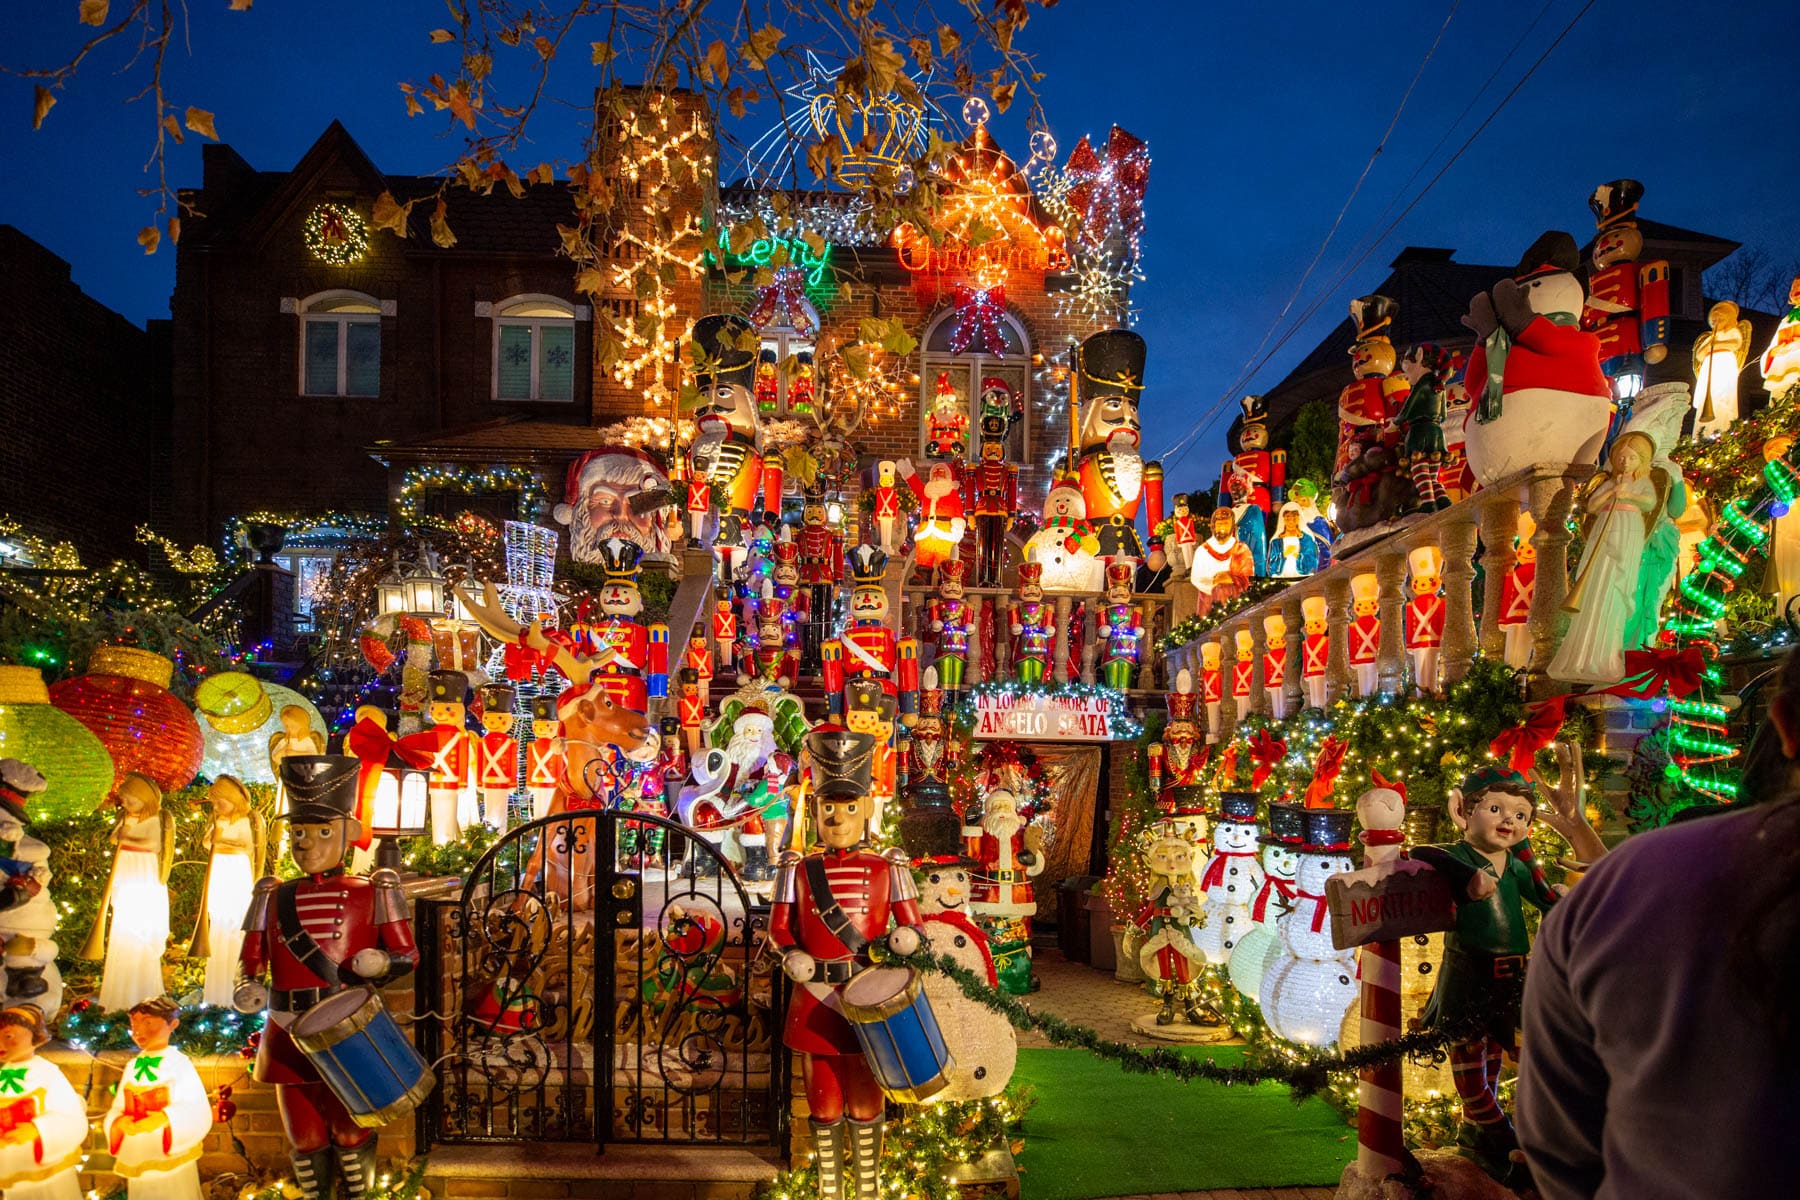 Dyker Heights Christmas Lights
free things to do during Christmas in New York City